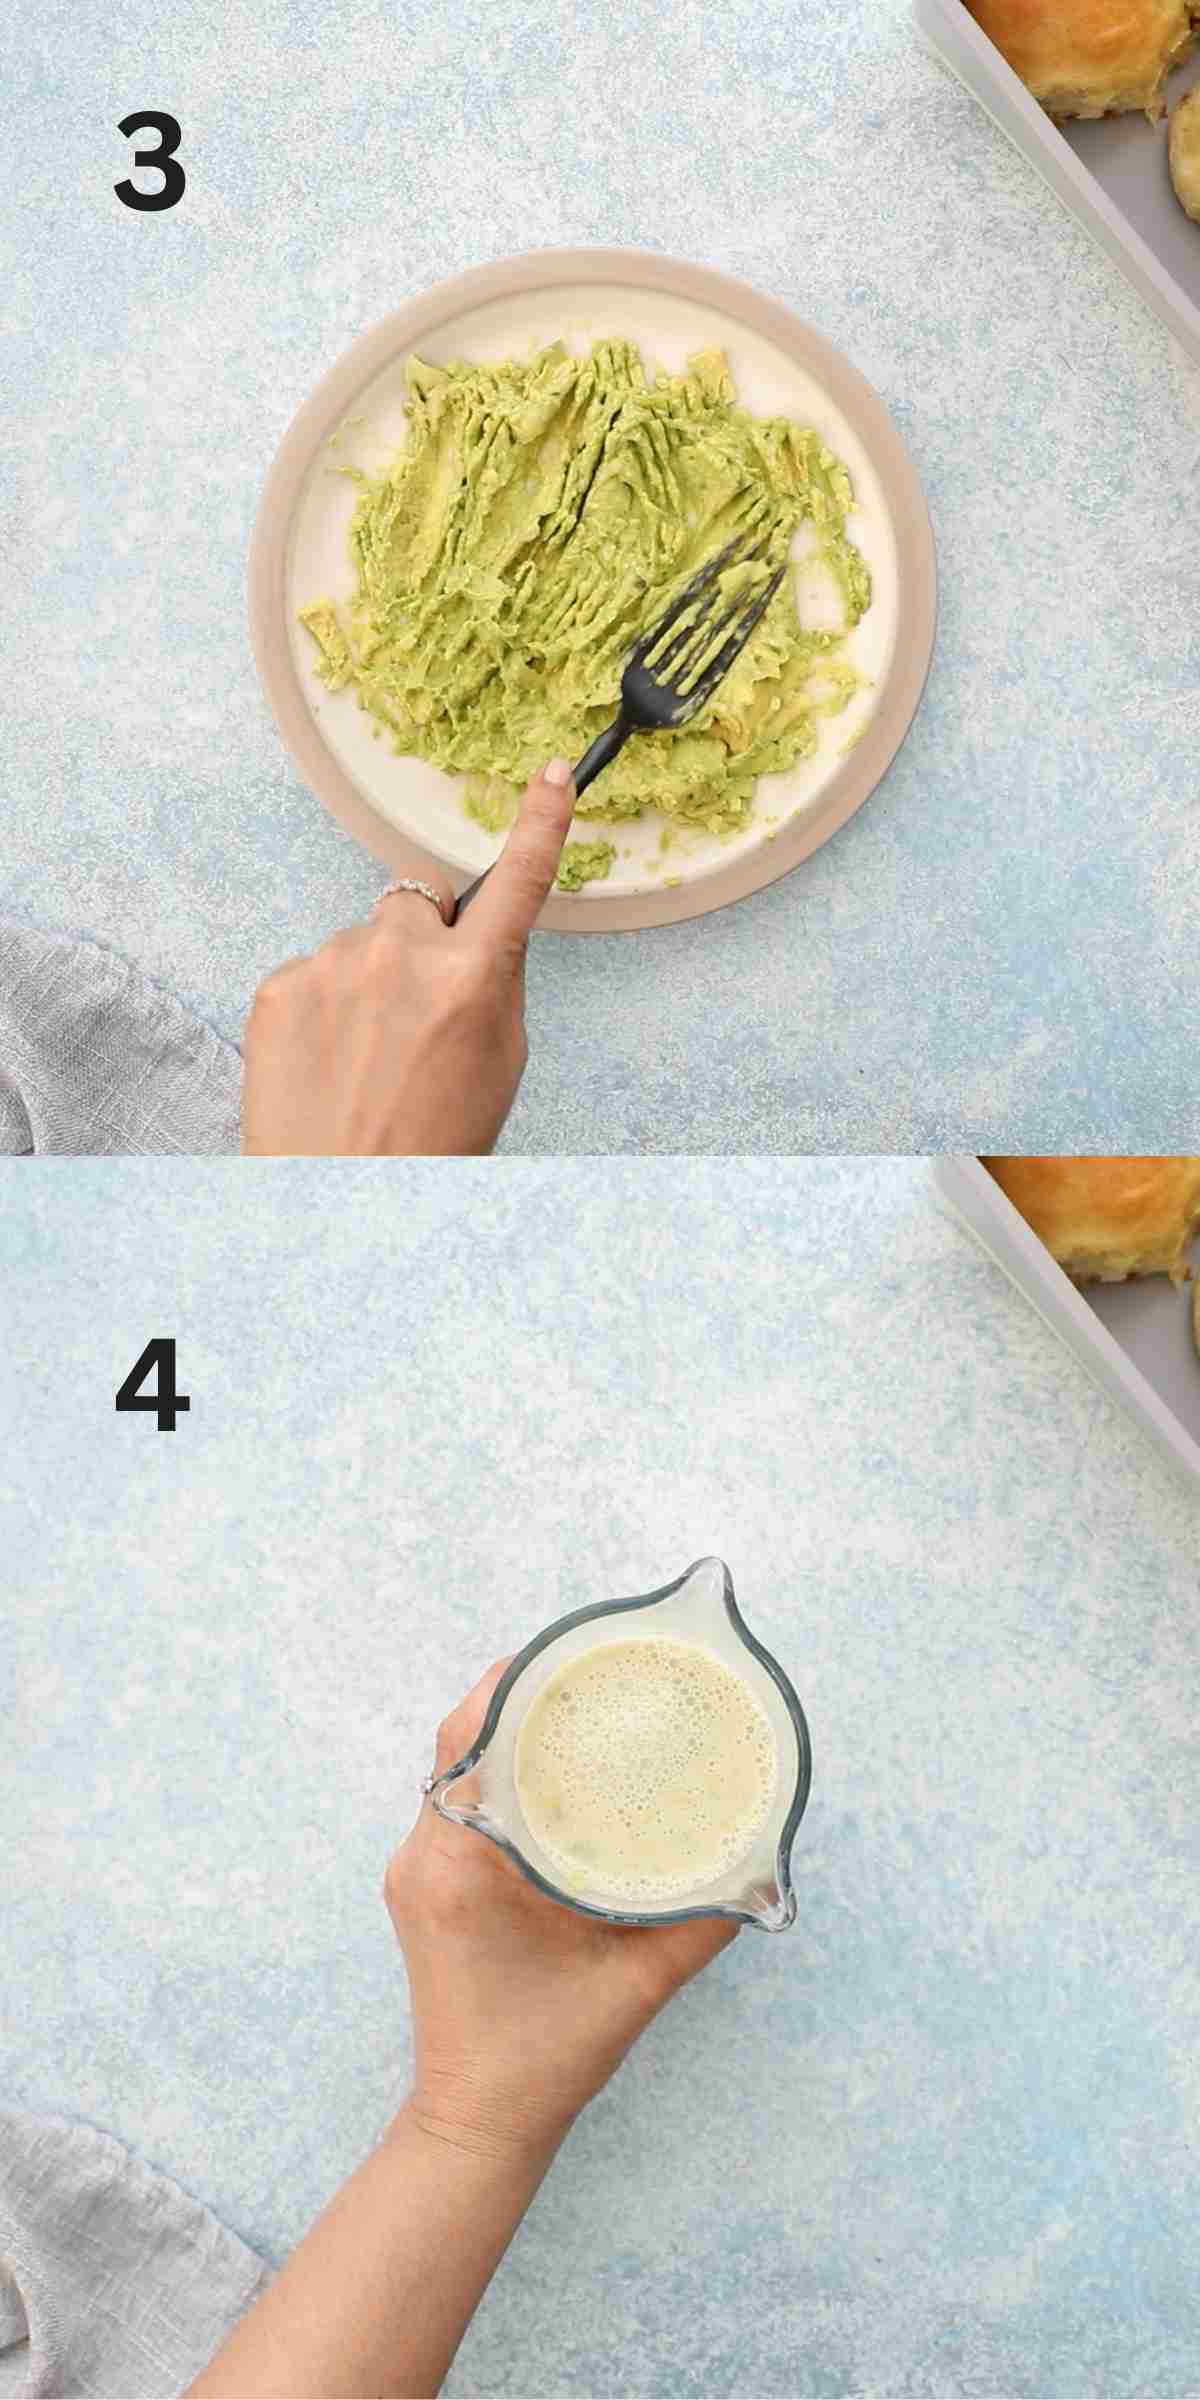 2 photo collage of a hand mashing avocado in a plate and mixing with a yeast mixture.